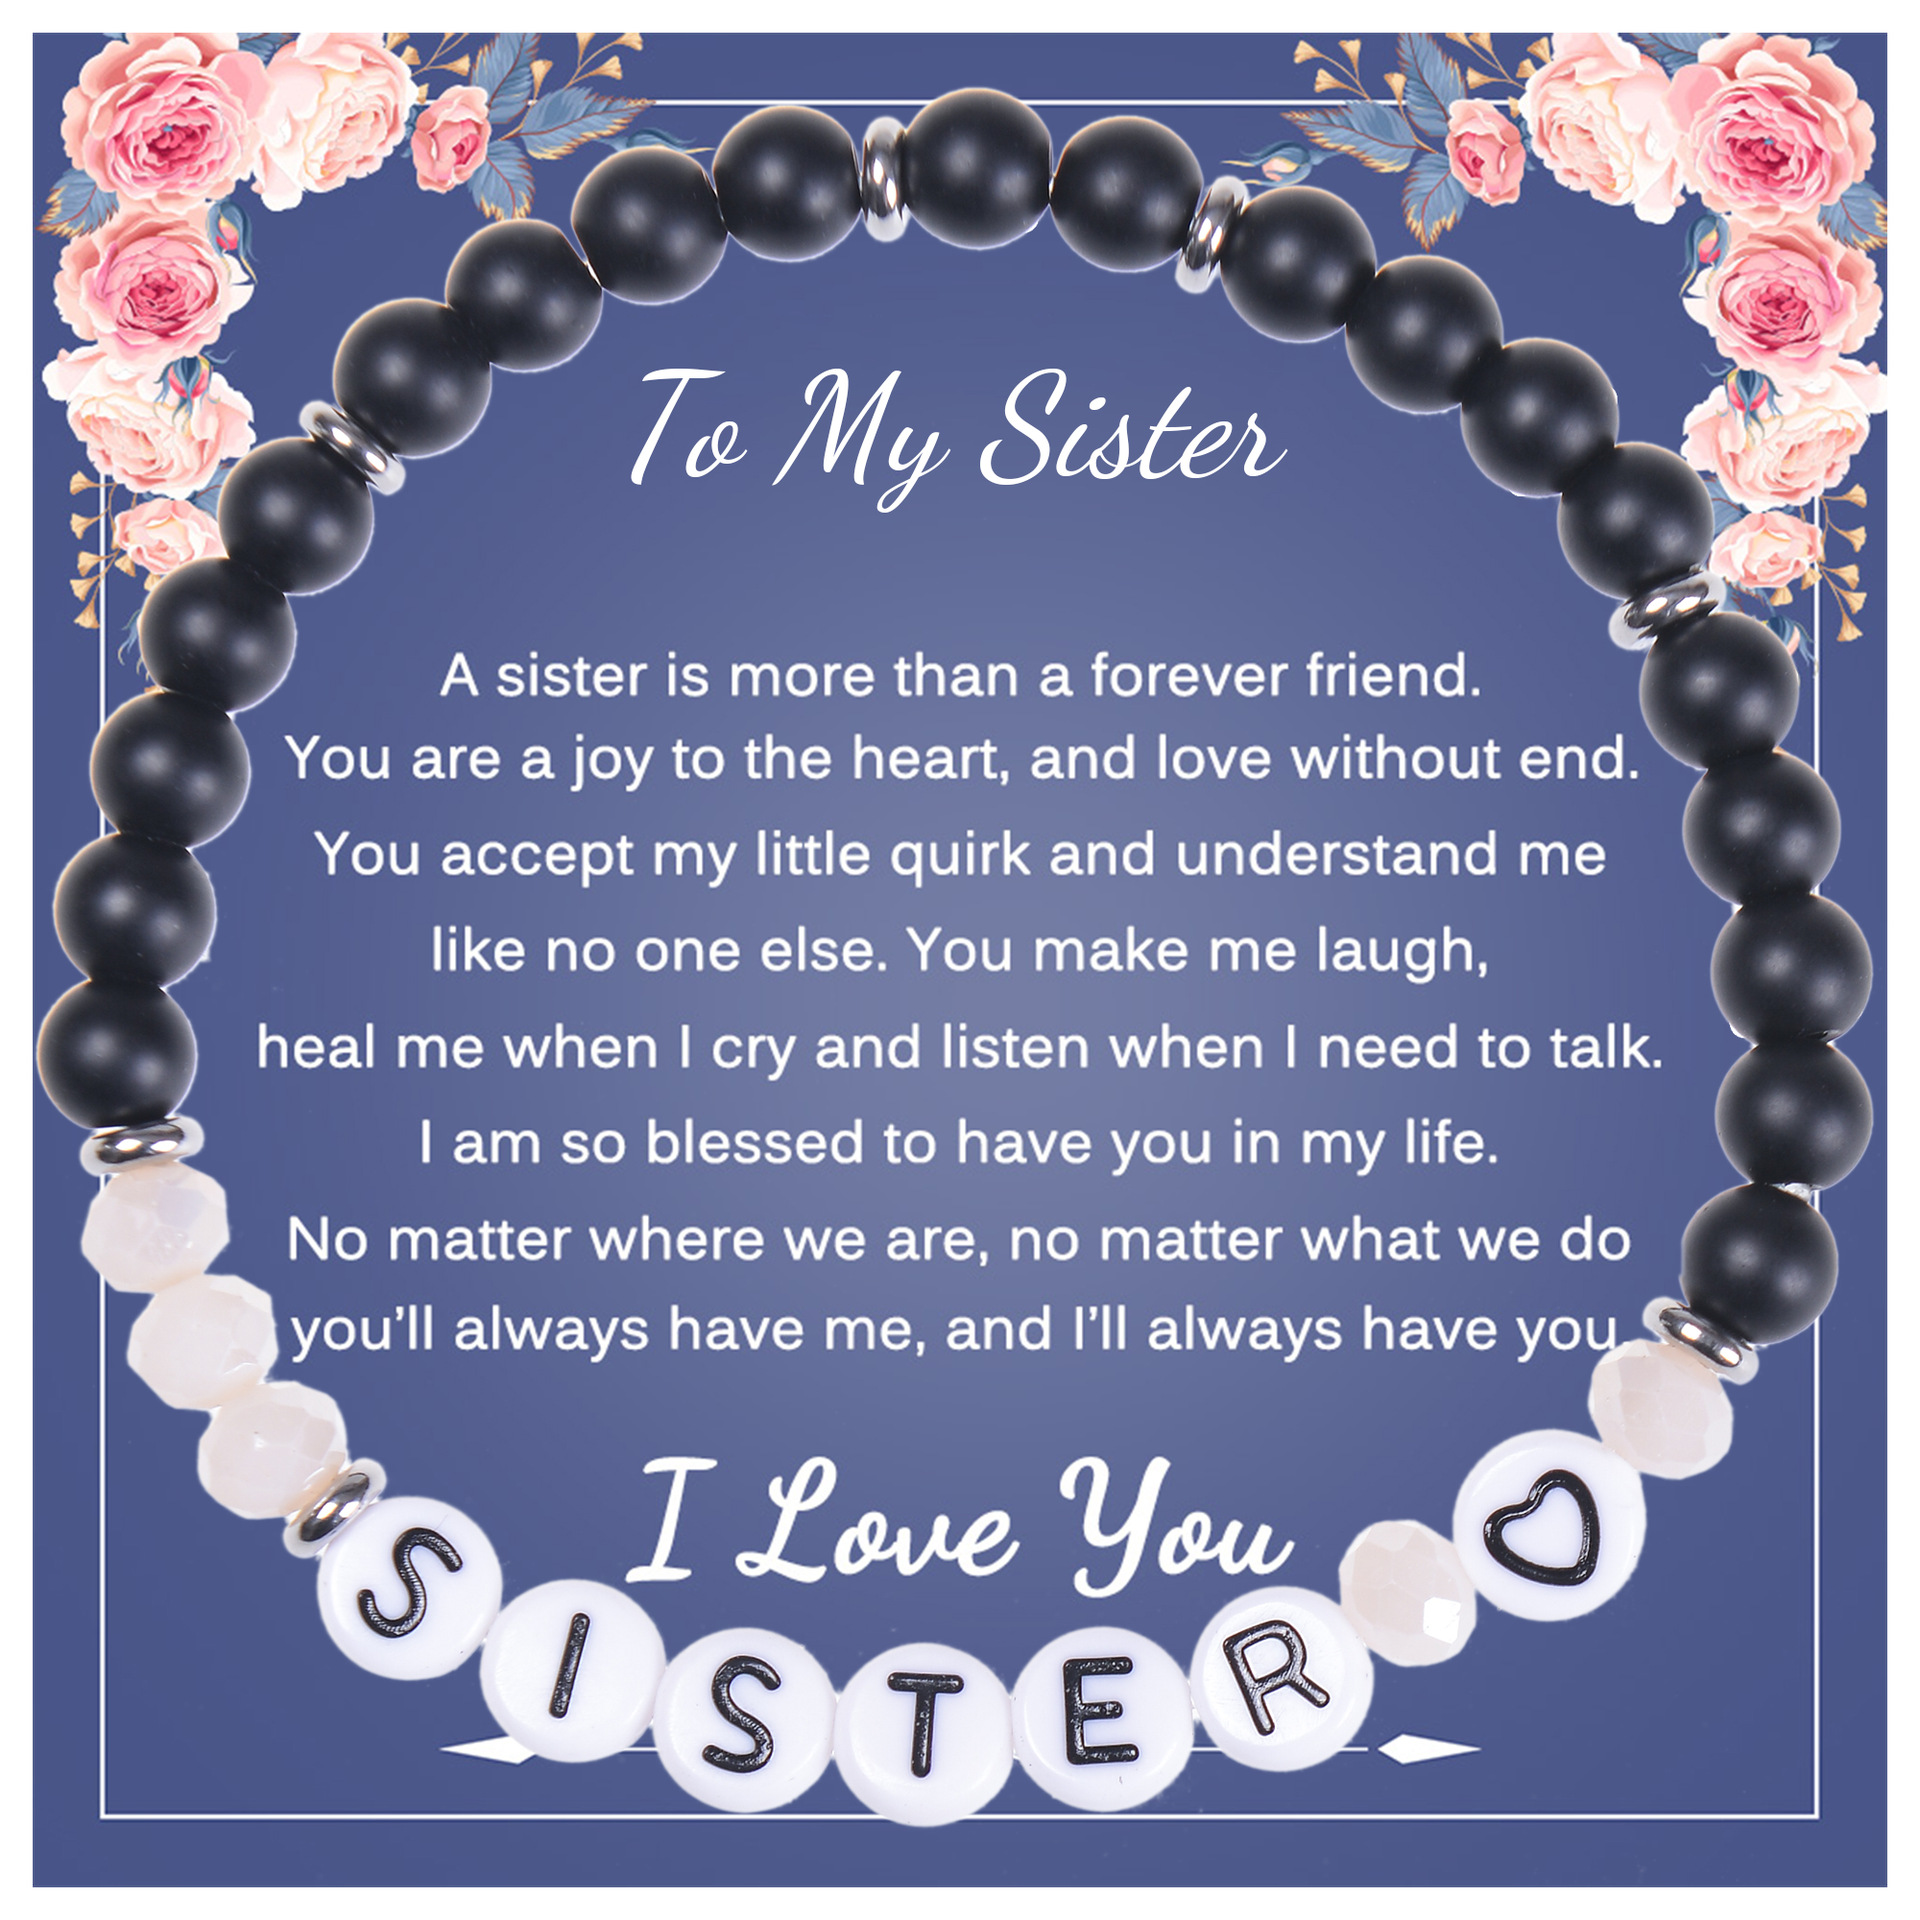 3:To My Sister